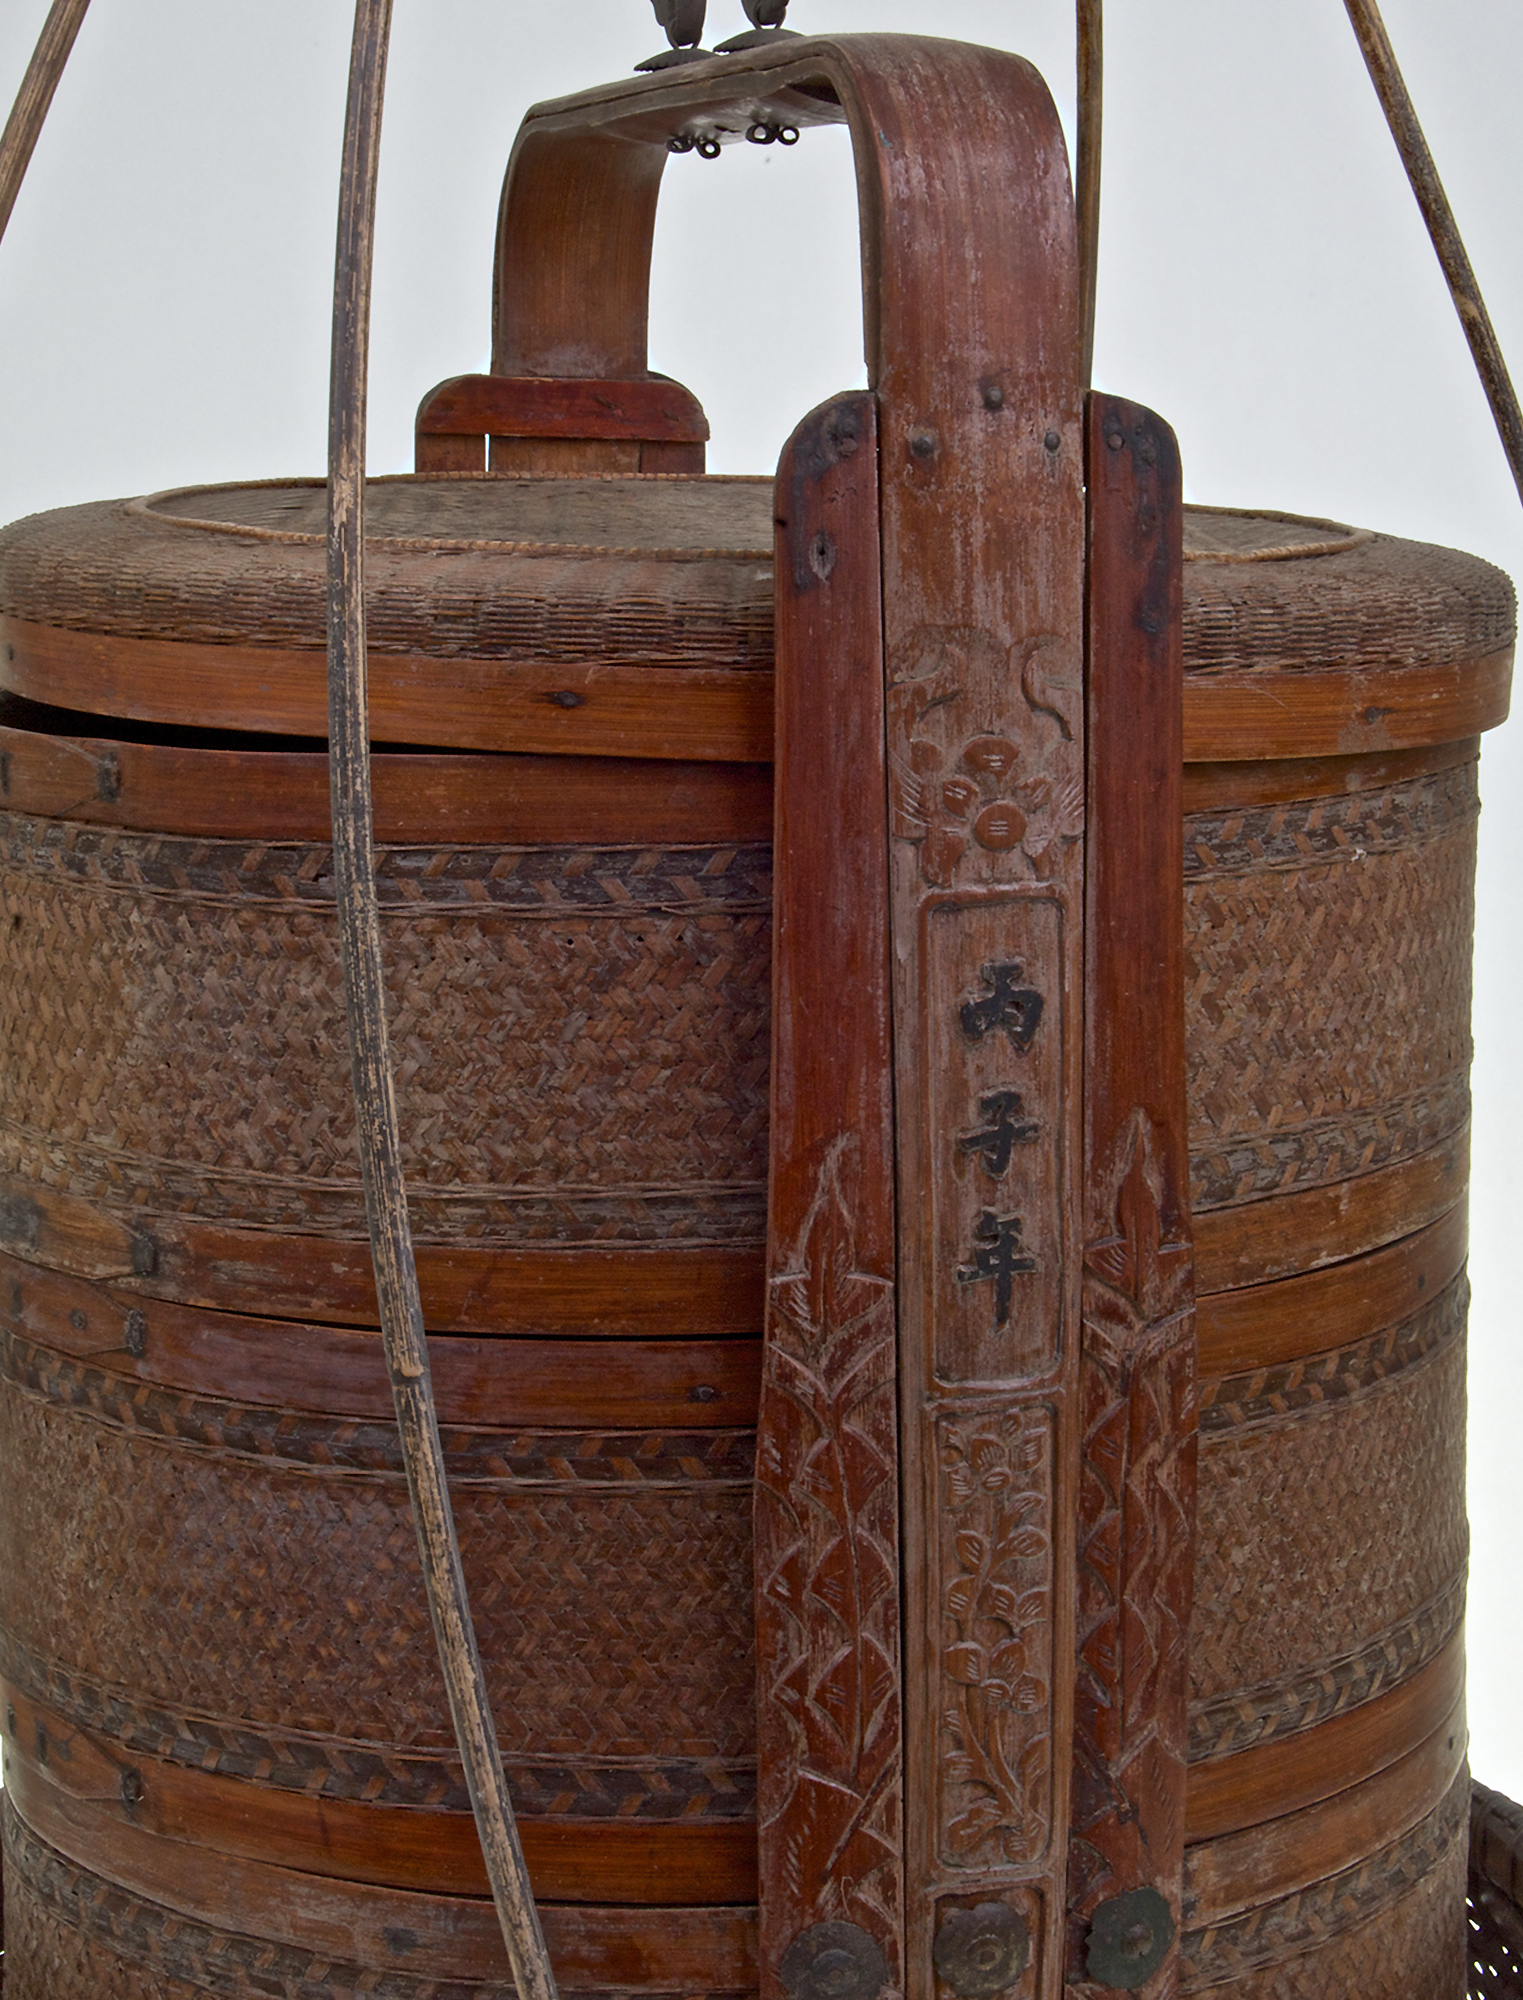 3 Tier Vintage Wooden Chinese Rice Steamer